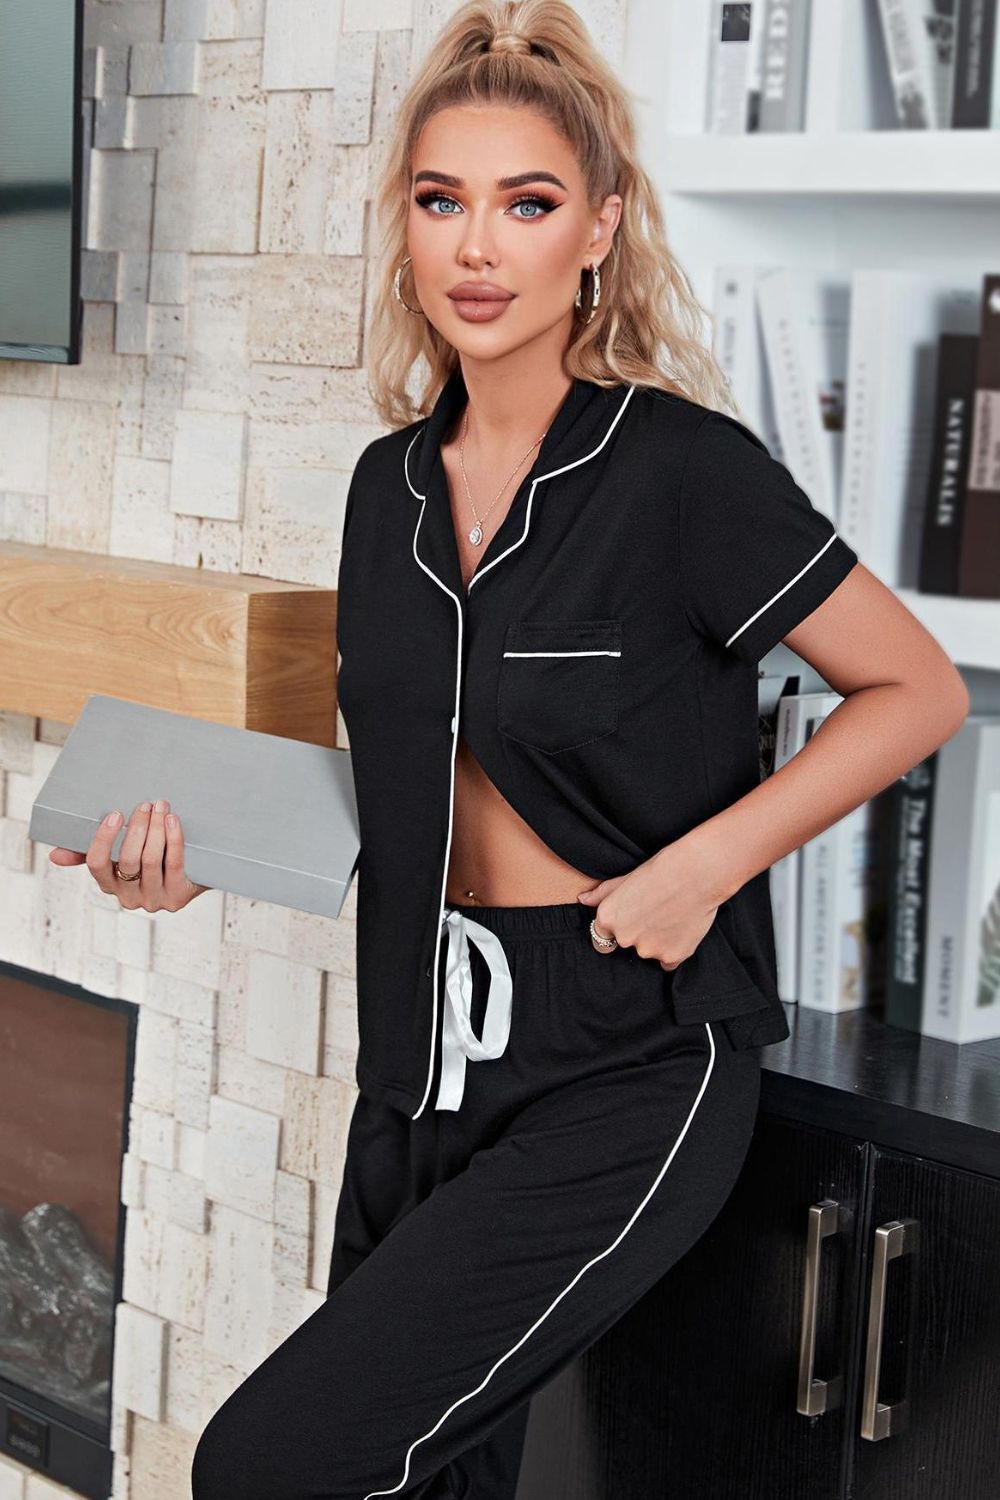 Contrast Piping Short Sleeve Top and Pants Pajama Set - Apparel & Accessories Girl Code